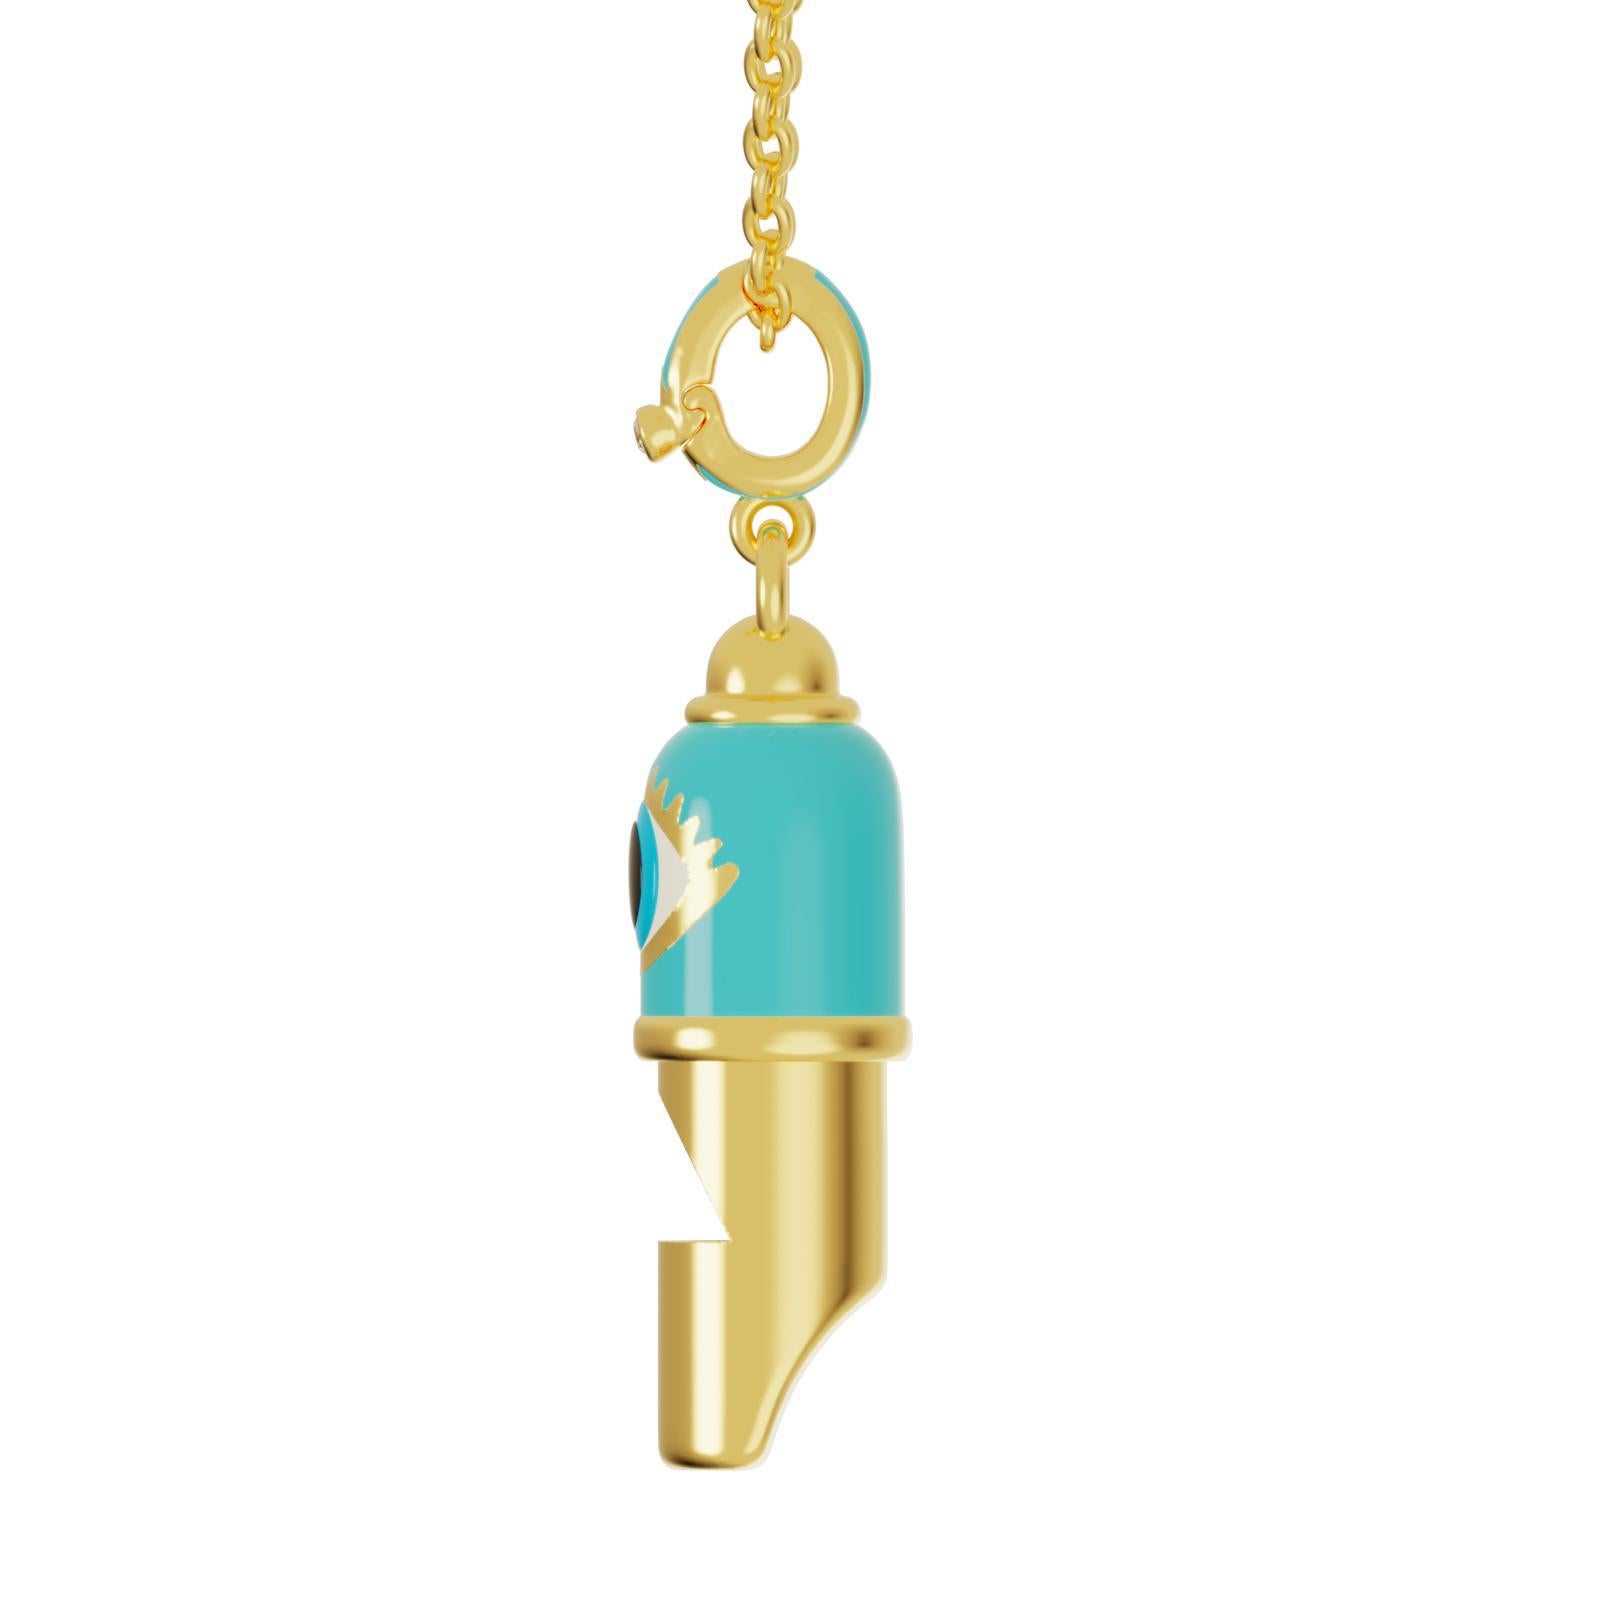 Introducing our exquisite Evil Eye Whistle Pendant Necklace, a stunning combination of elegance, functionality, and spiritual significance. This gold vermeil pendant is thoughtfully crafted to enhance your style while providing actual and spiritual